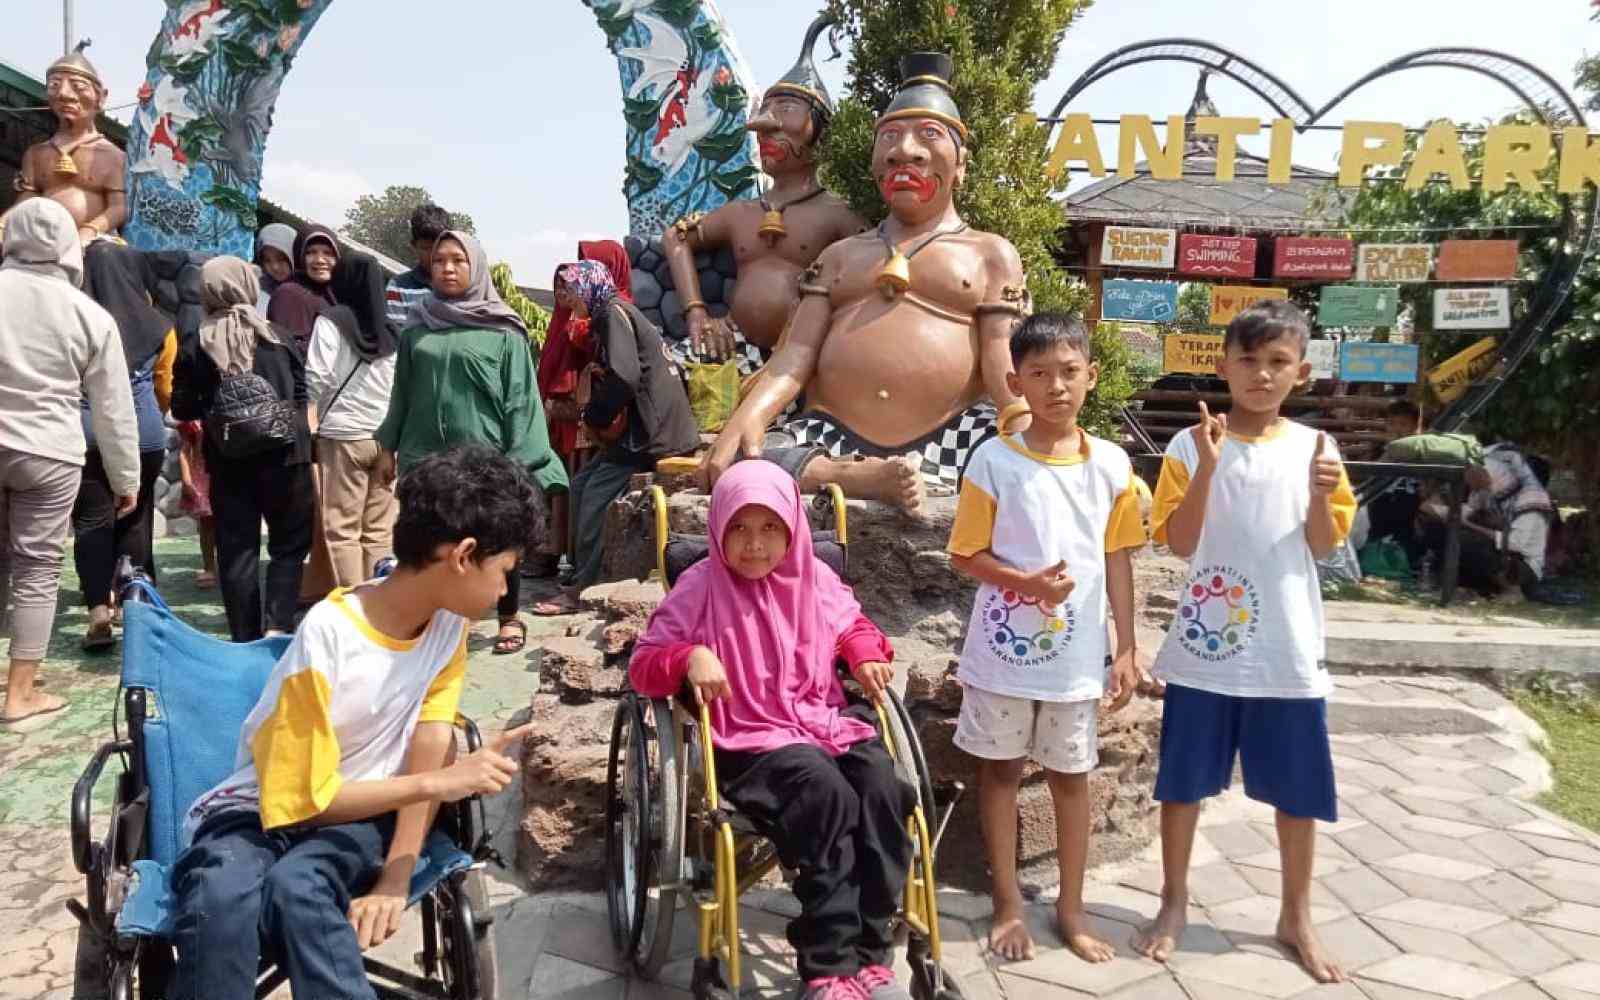 Indonesian children posing in a cultural park, some are in wheelchairs